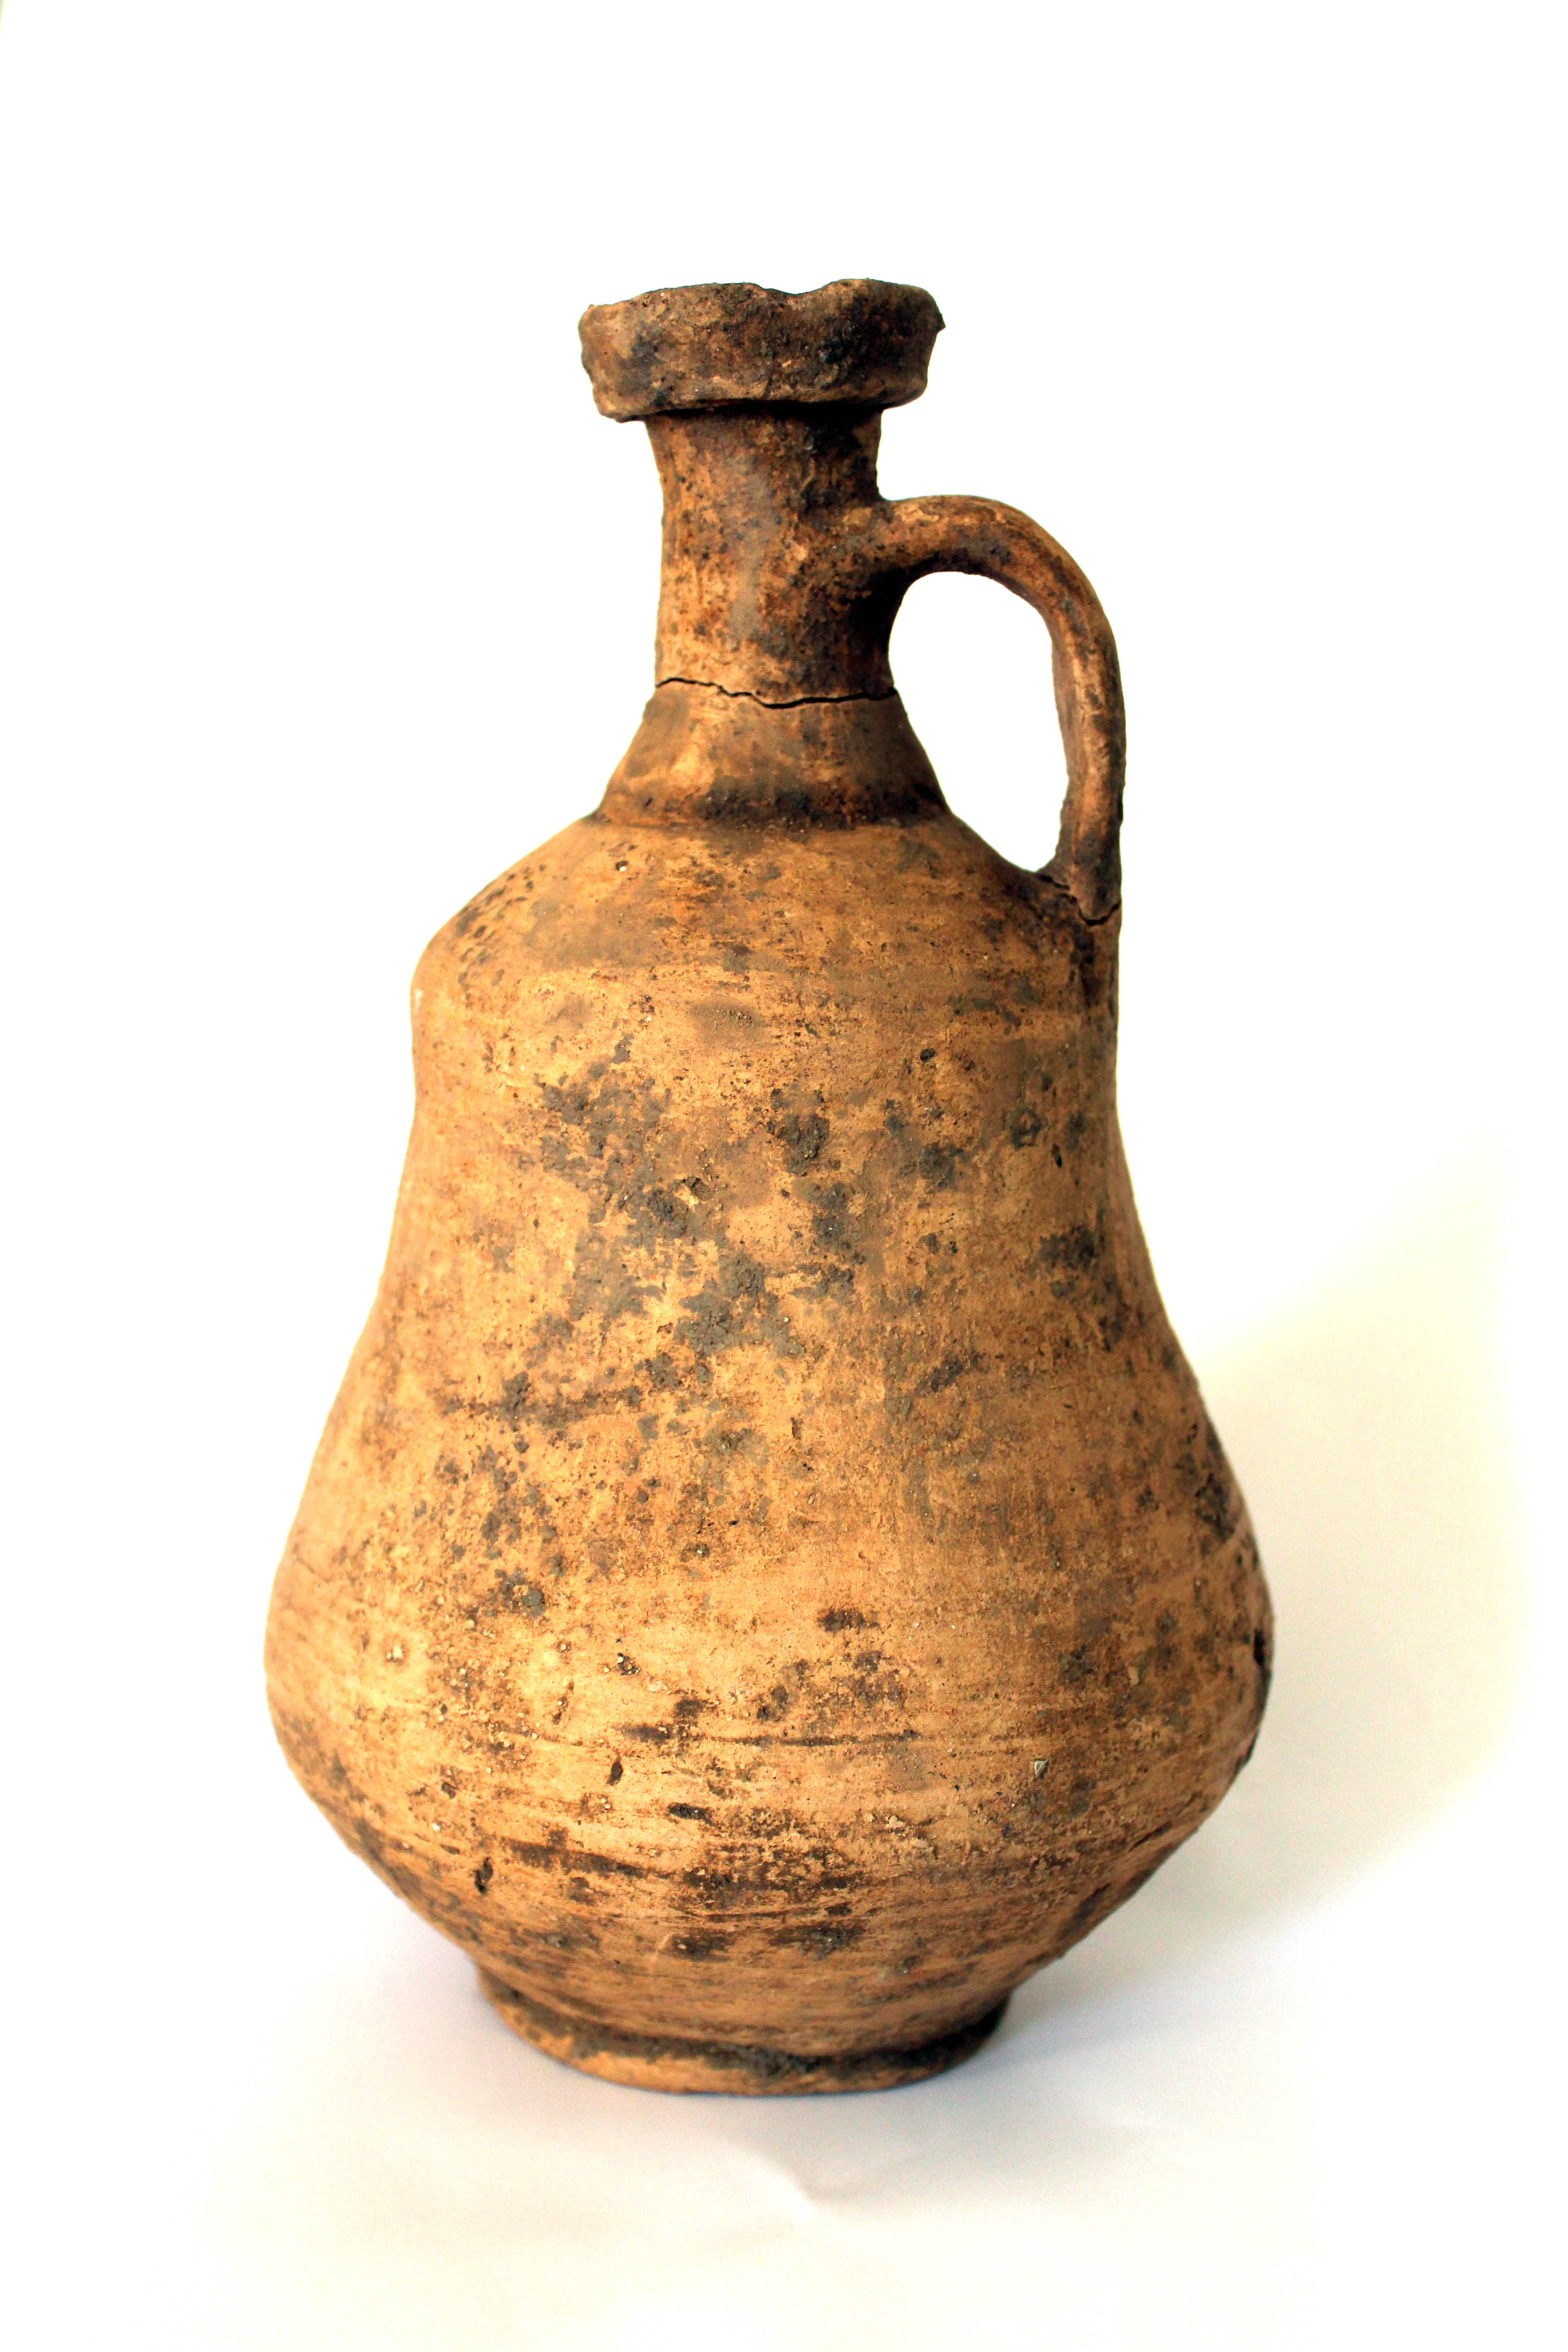 Late Iron Age/Roman flagon Copyright Thames Valley Archaeological Services